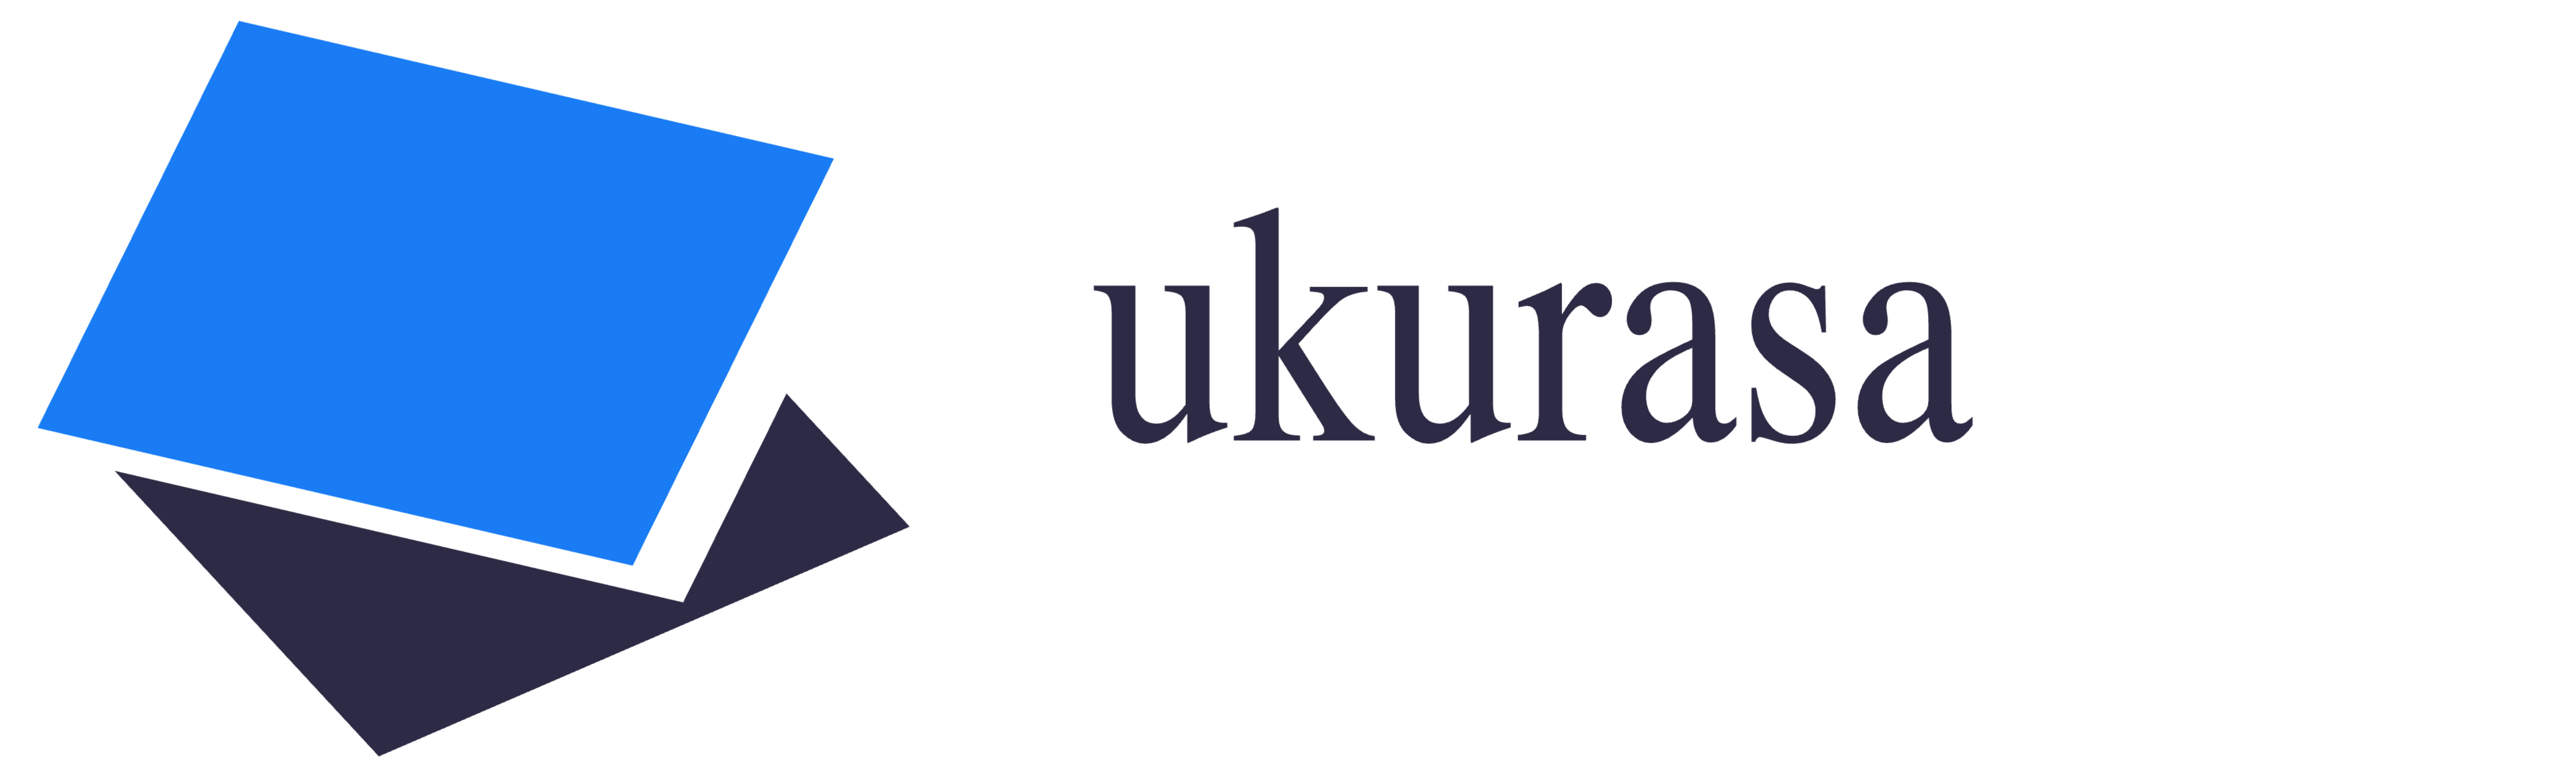 Accurately track stocks, sales, expenses, and profits. Manage your business confidently from anywhere. No headaches. Get all you need to run your business. | Ukurasa | https://ukurasa.com